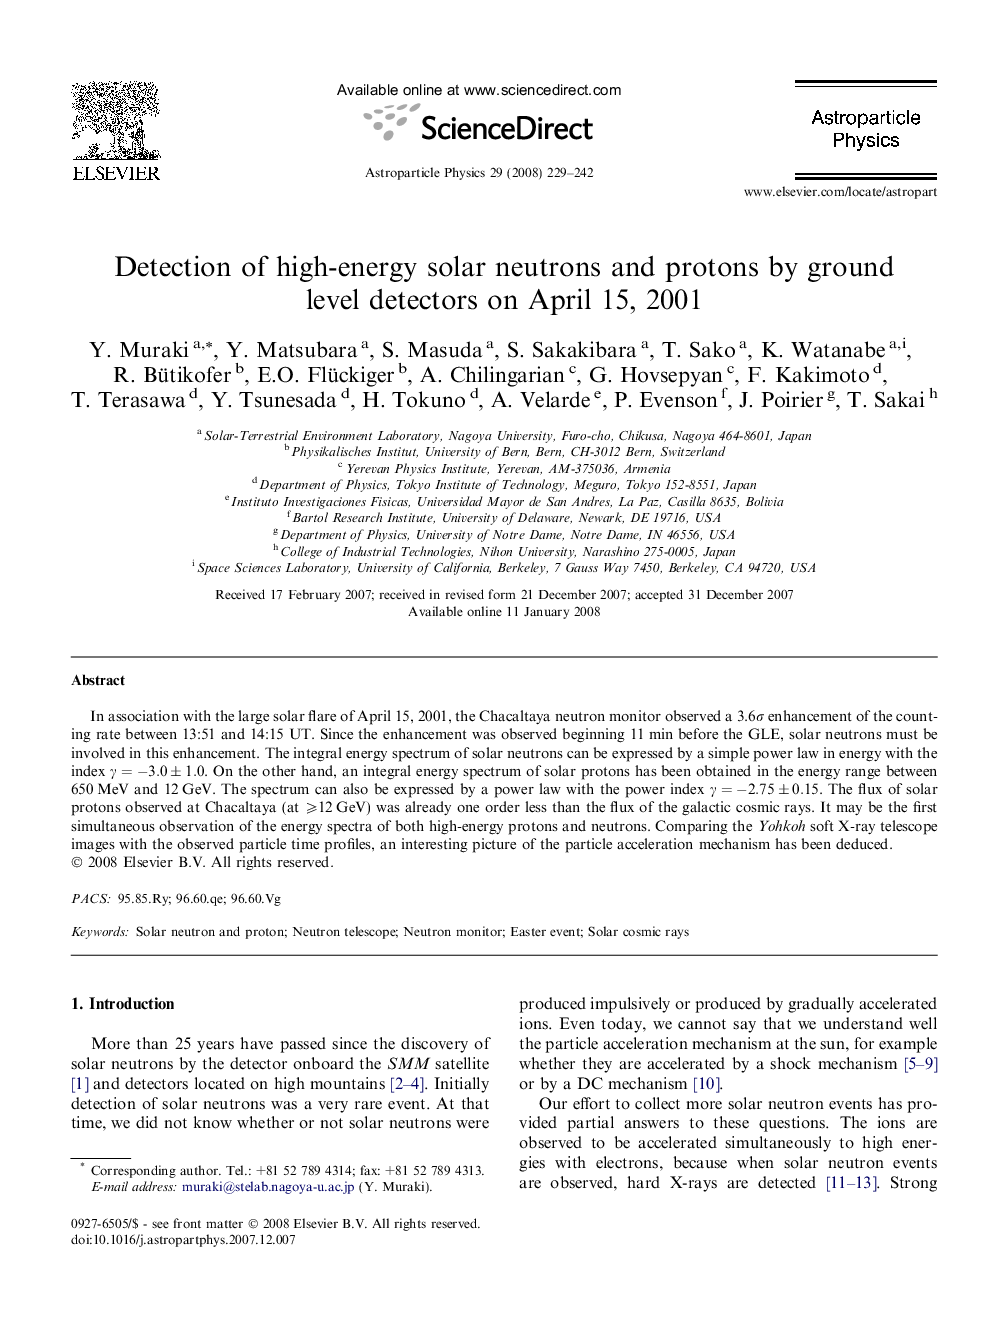 Detection of high-energy solar neutrons and protons by ground level detectors on April 15, 2001